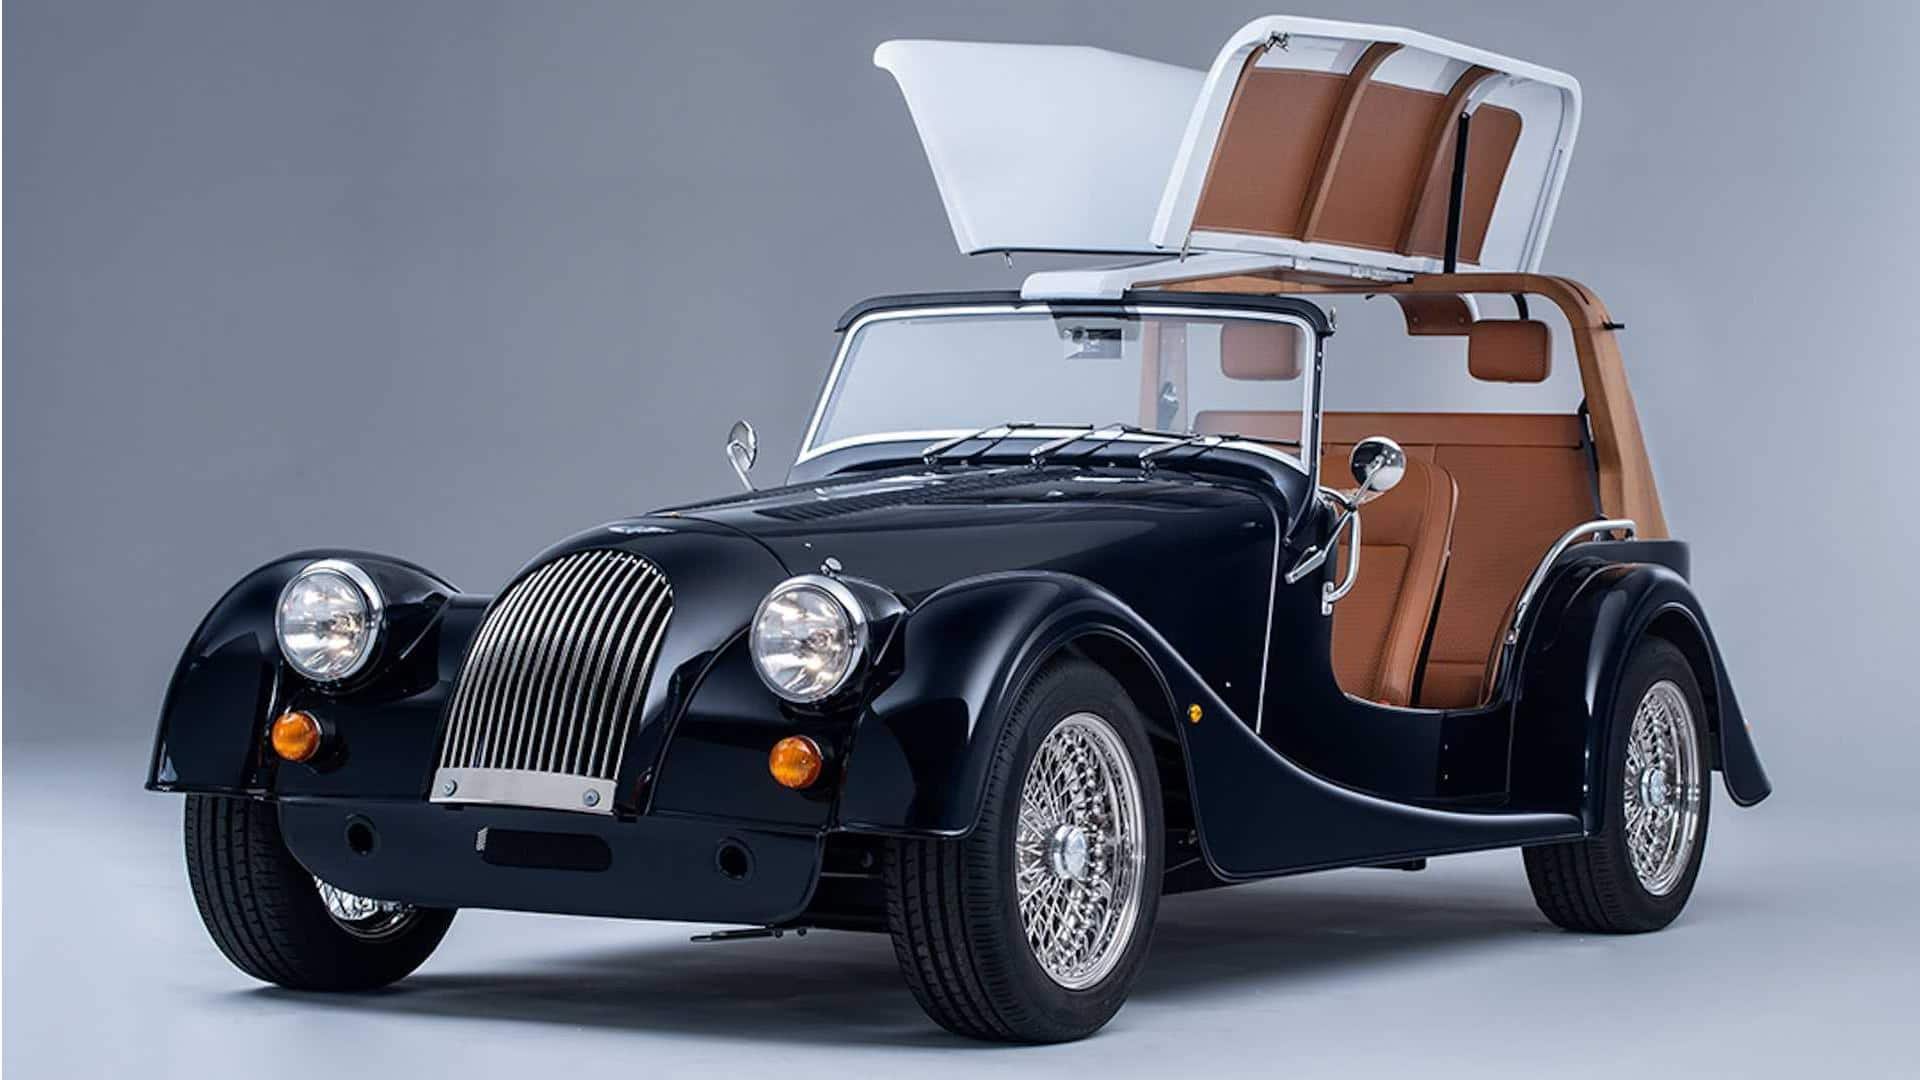 Top features of the one-off Morgan Plus Four Spiaggina explained